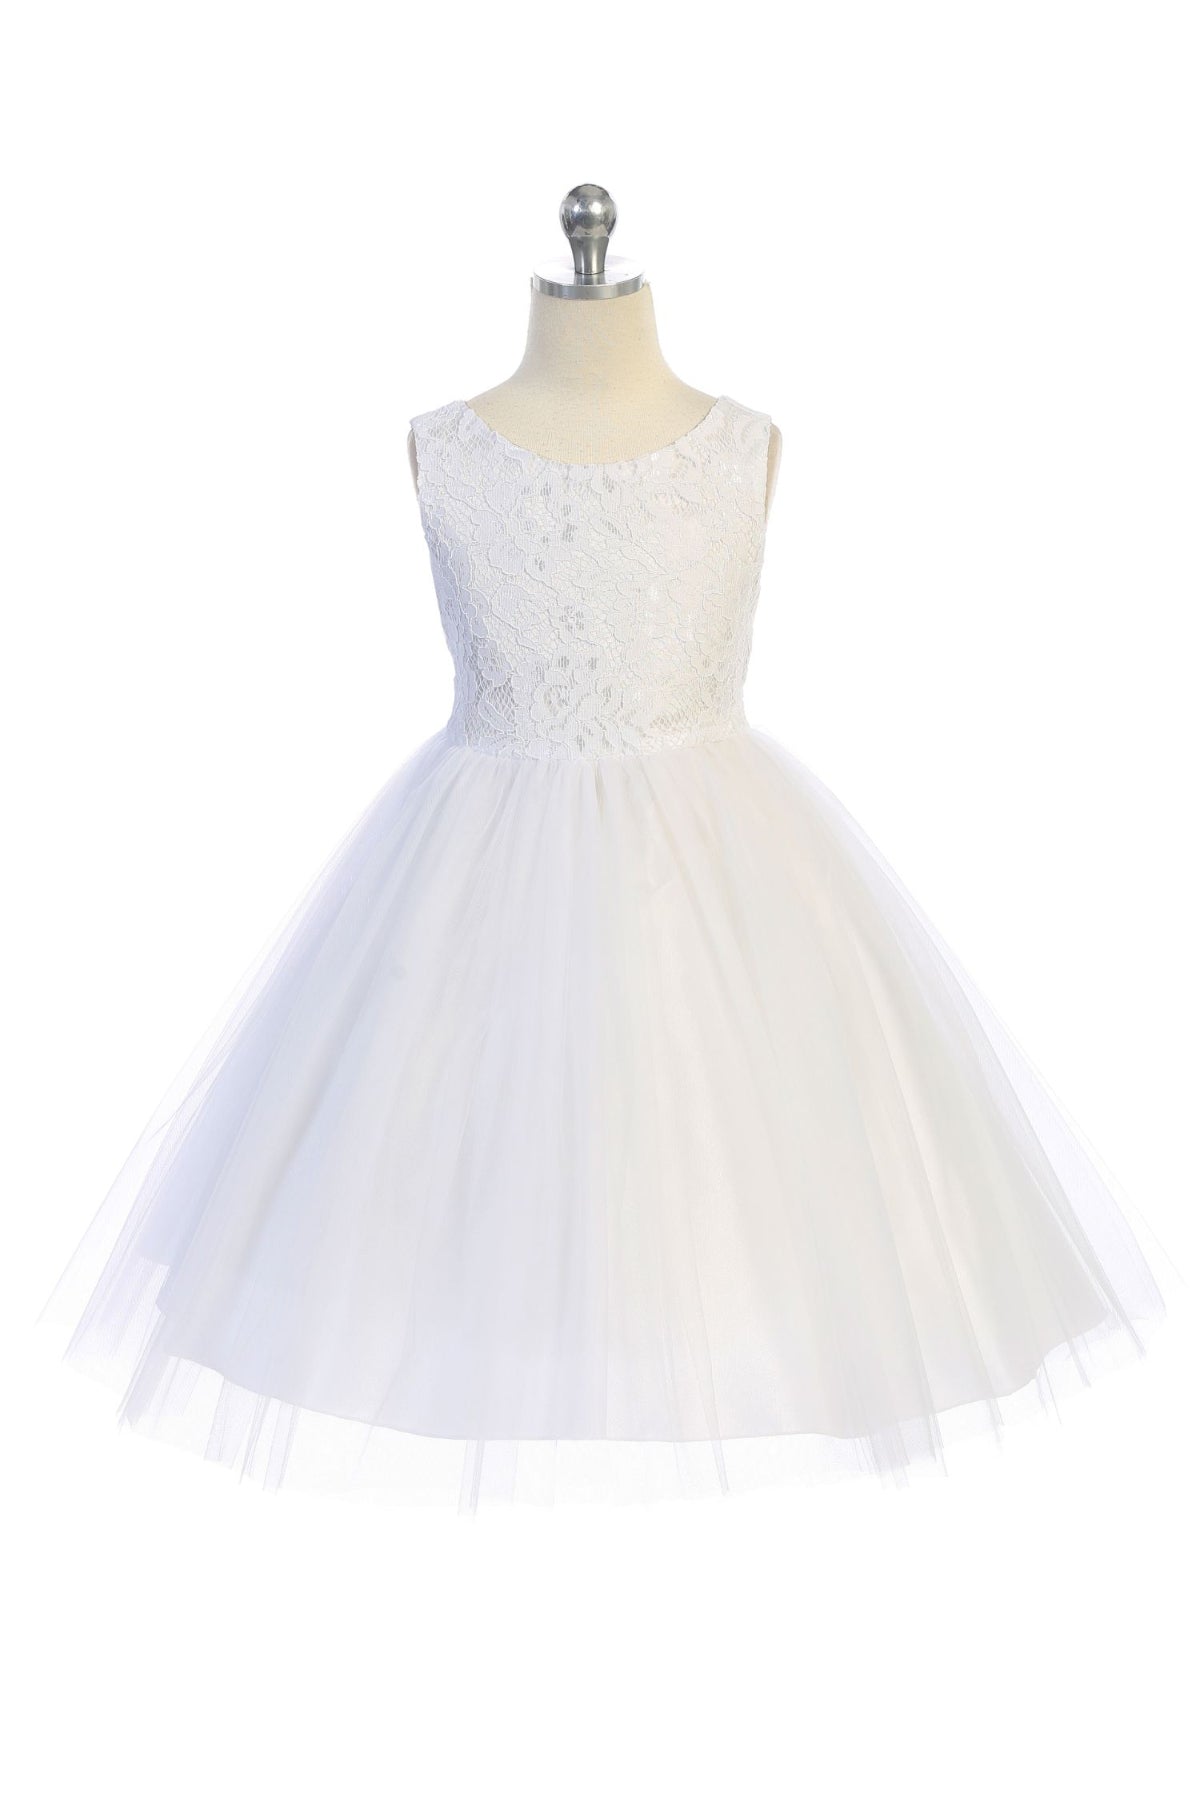 Lace Illusion Girls Dress with Mesh Pearl Trim